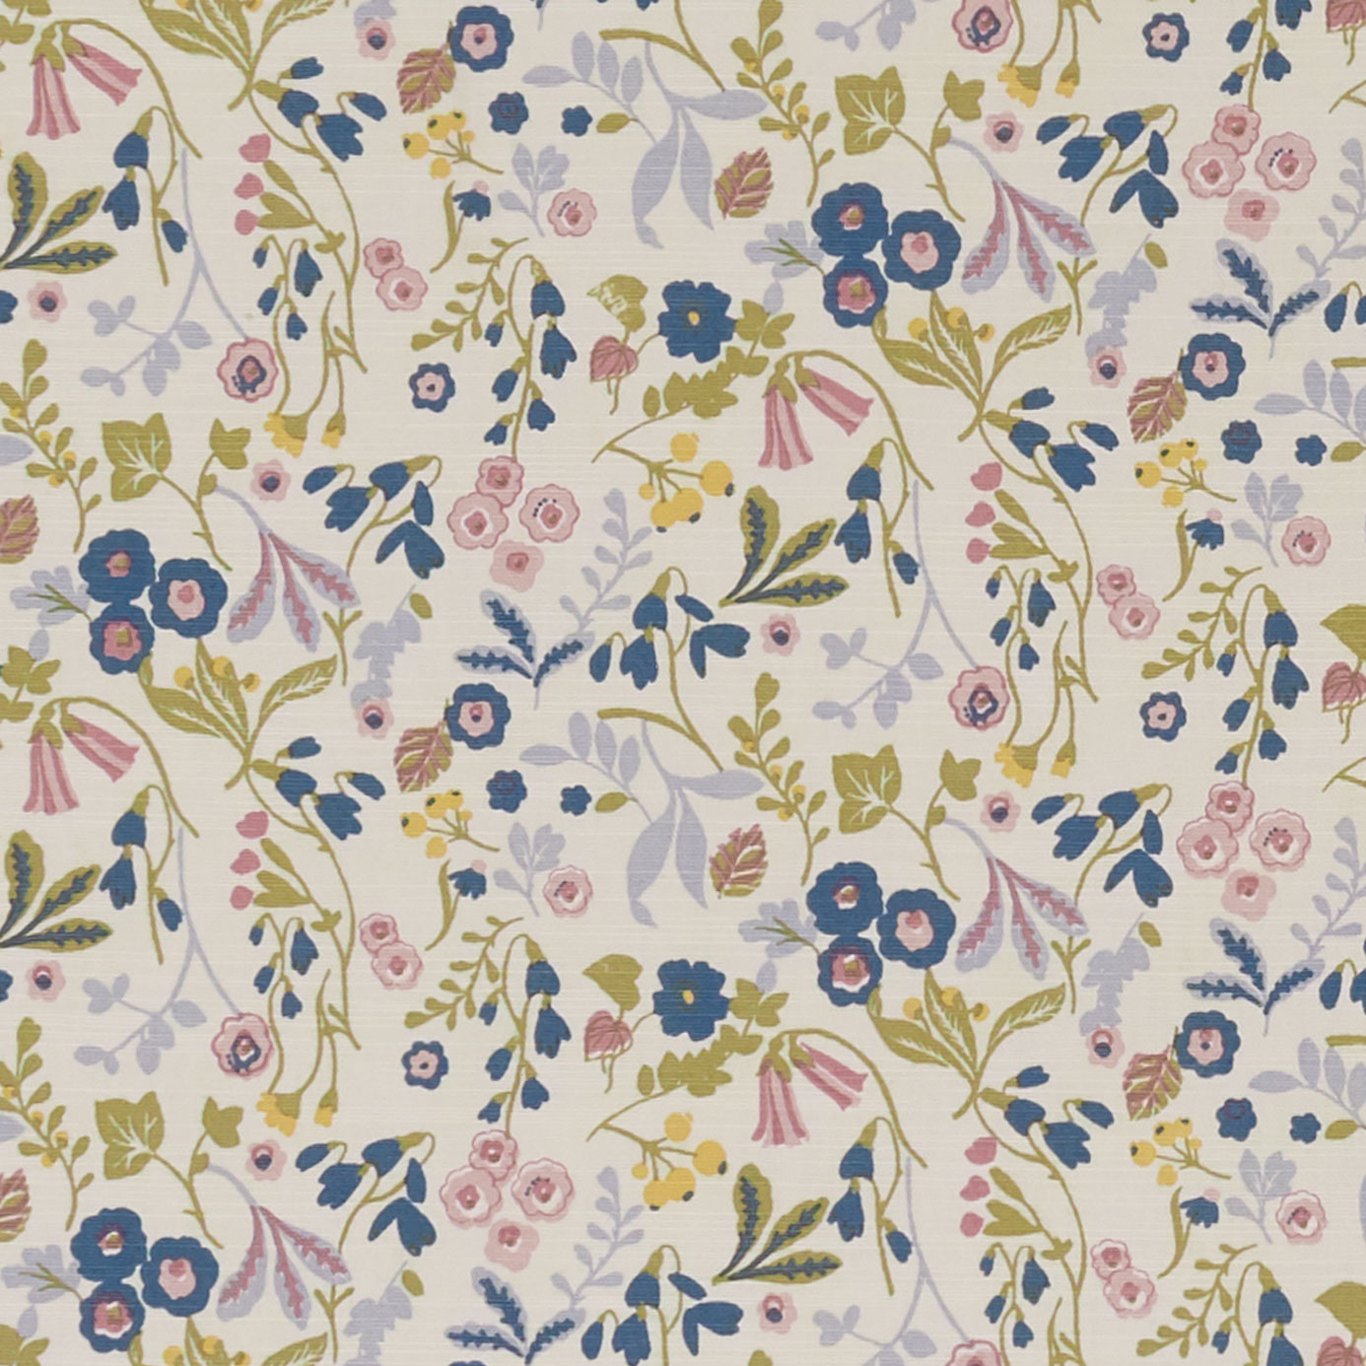 Ashbee Teal/Blush Fabric by STG